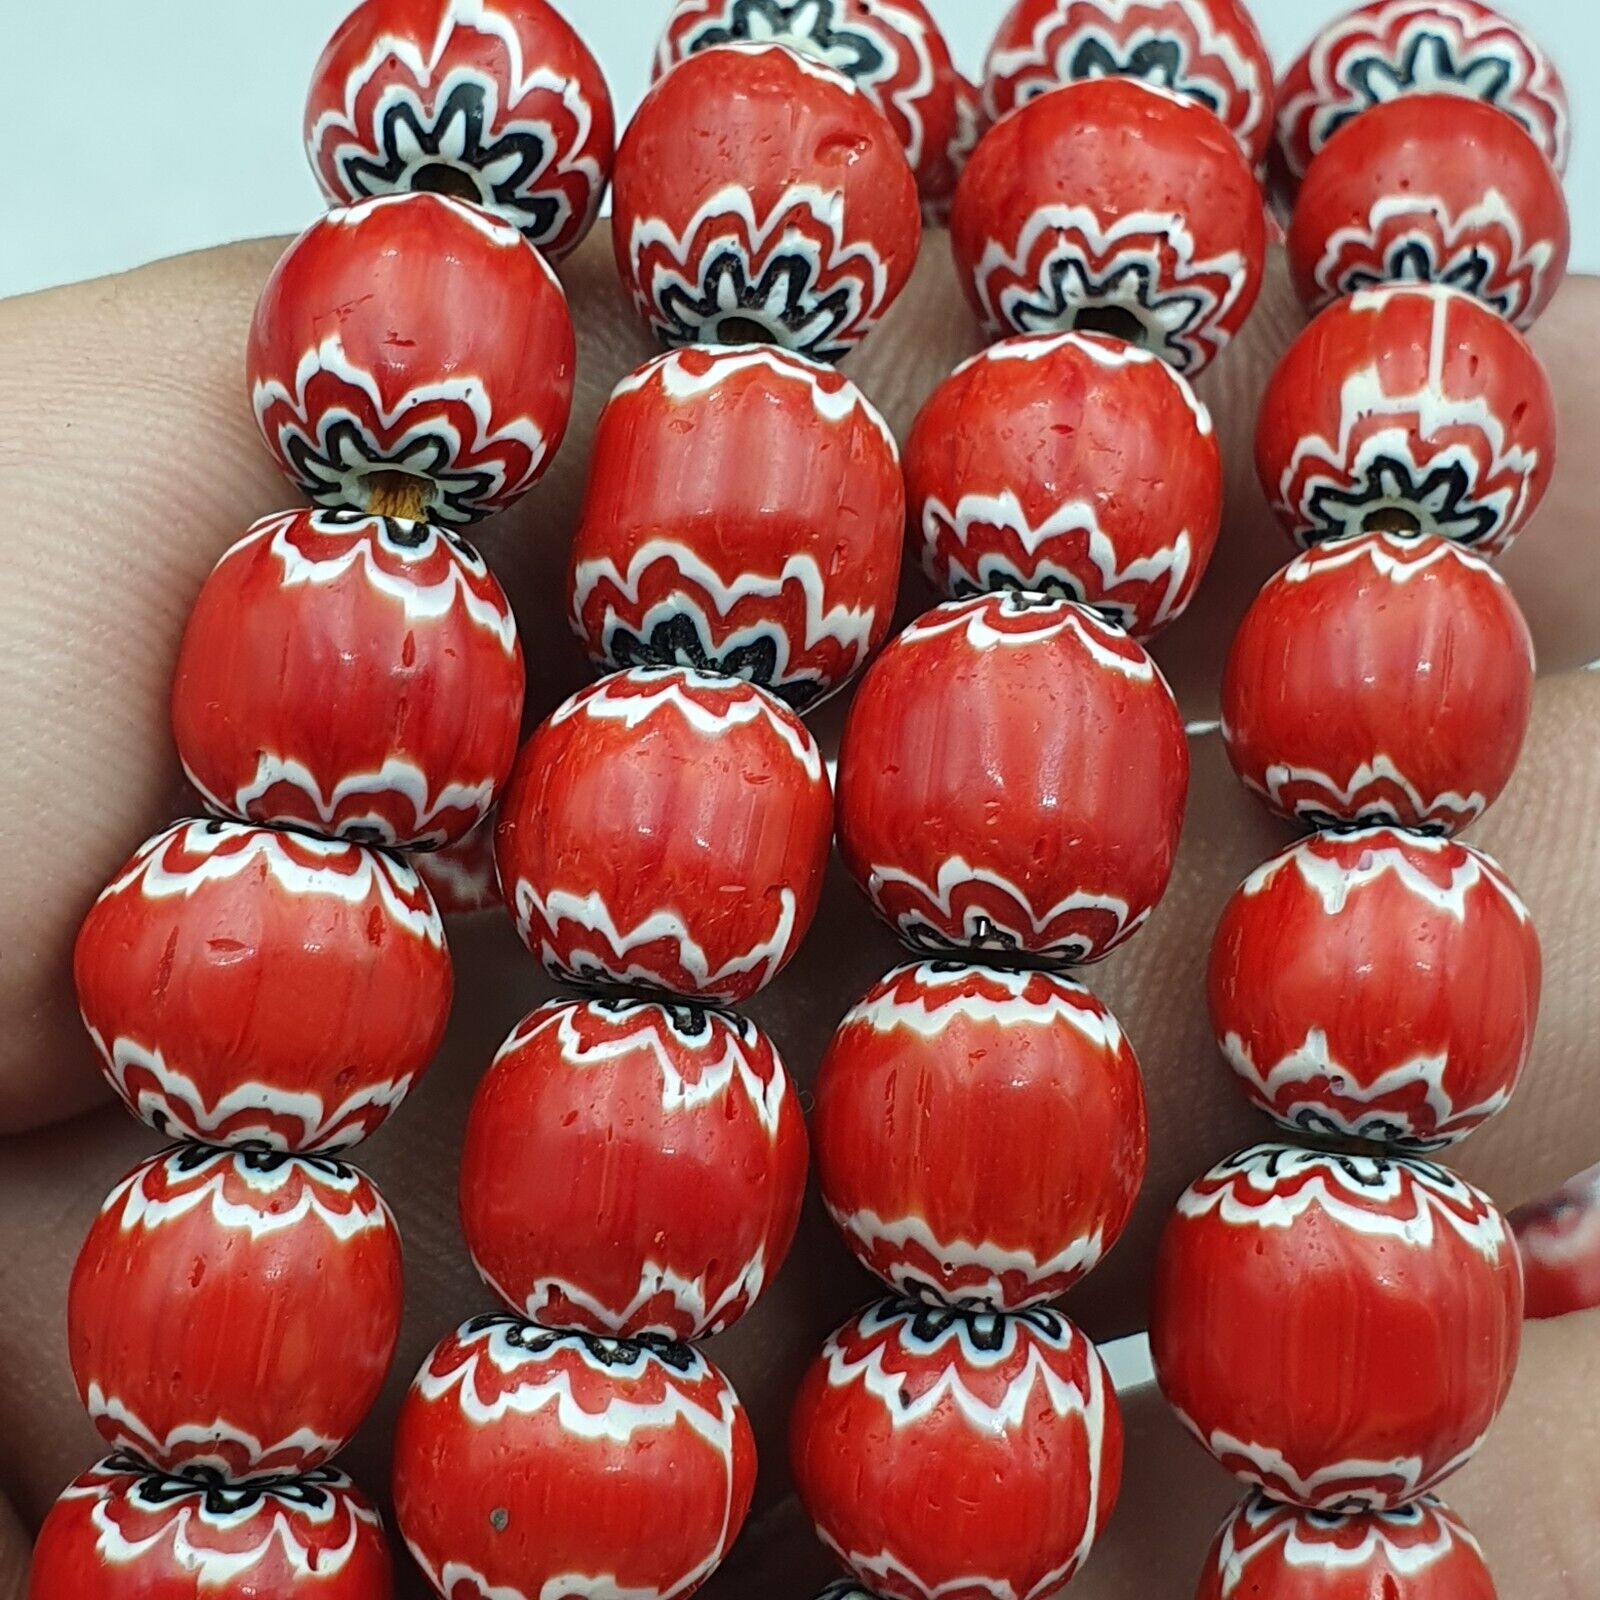 Vintage Venetian Trade Style beads Old Red Glass Chevron Beads Strand 10mm